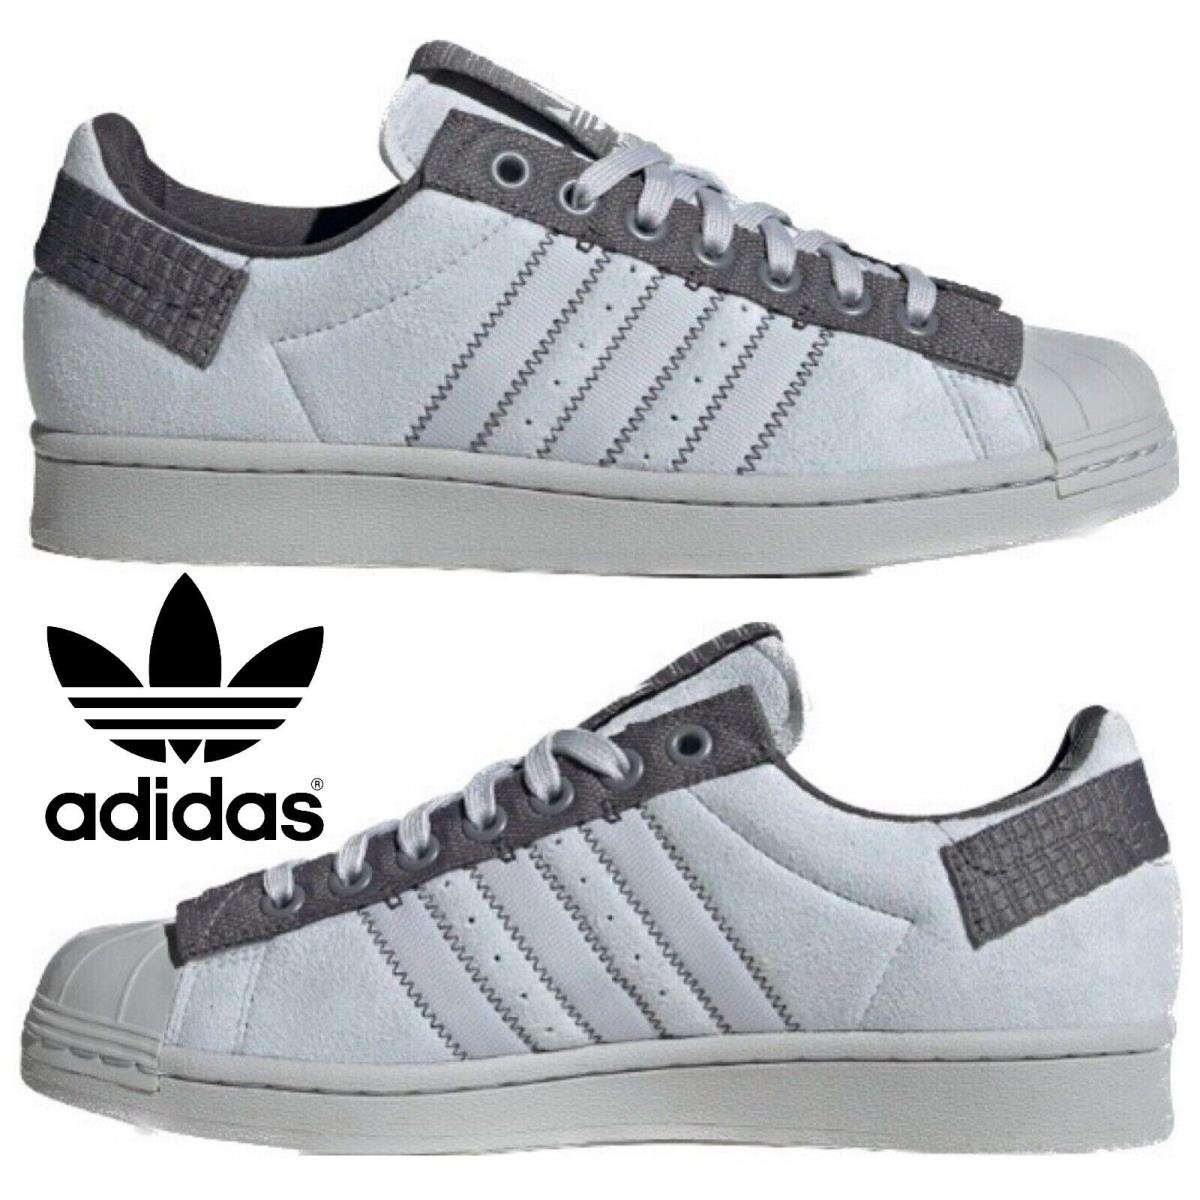 Adidas Superstar Parley Lifestyle Men`s Sneakers Comfort Sport Casual Shoes Grey